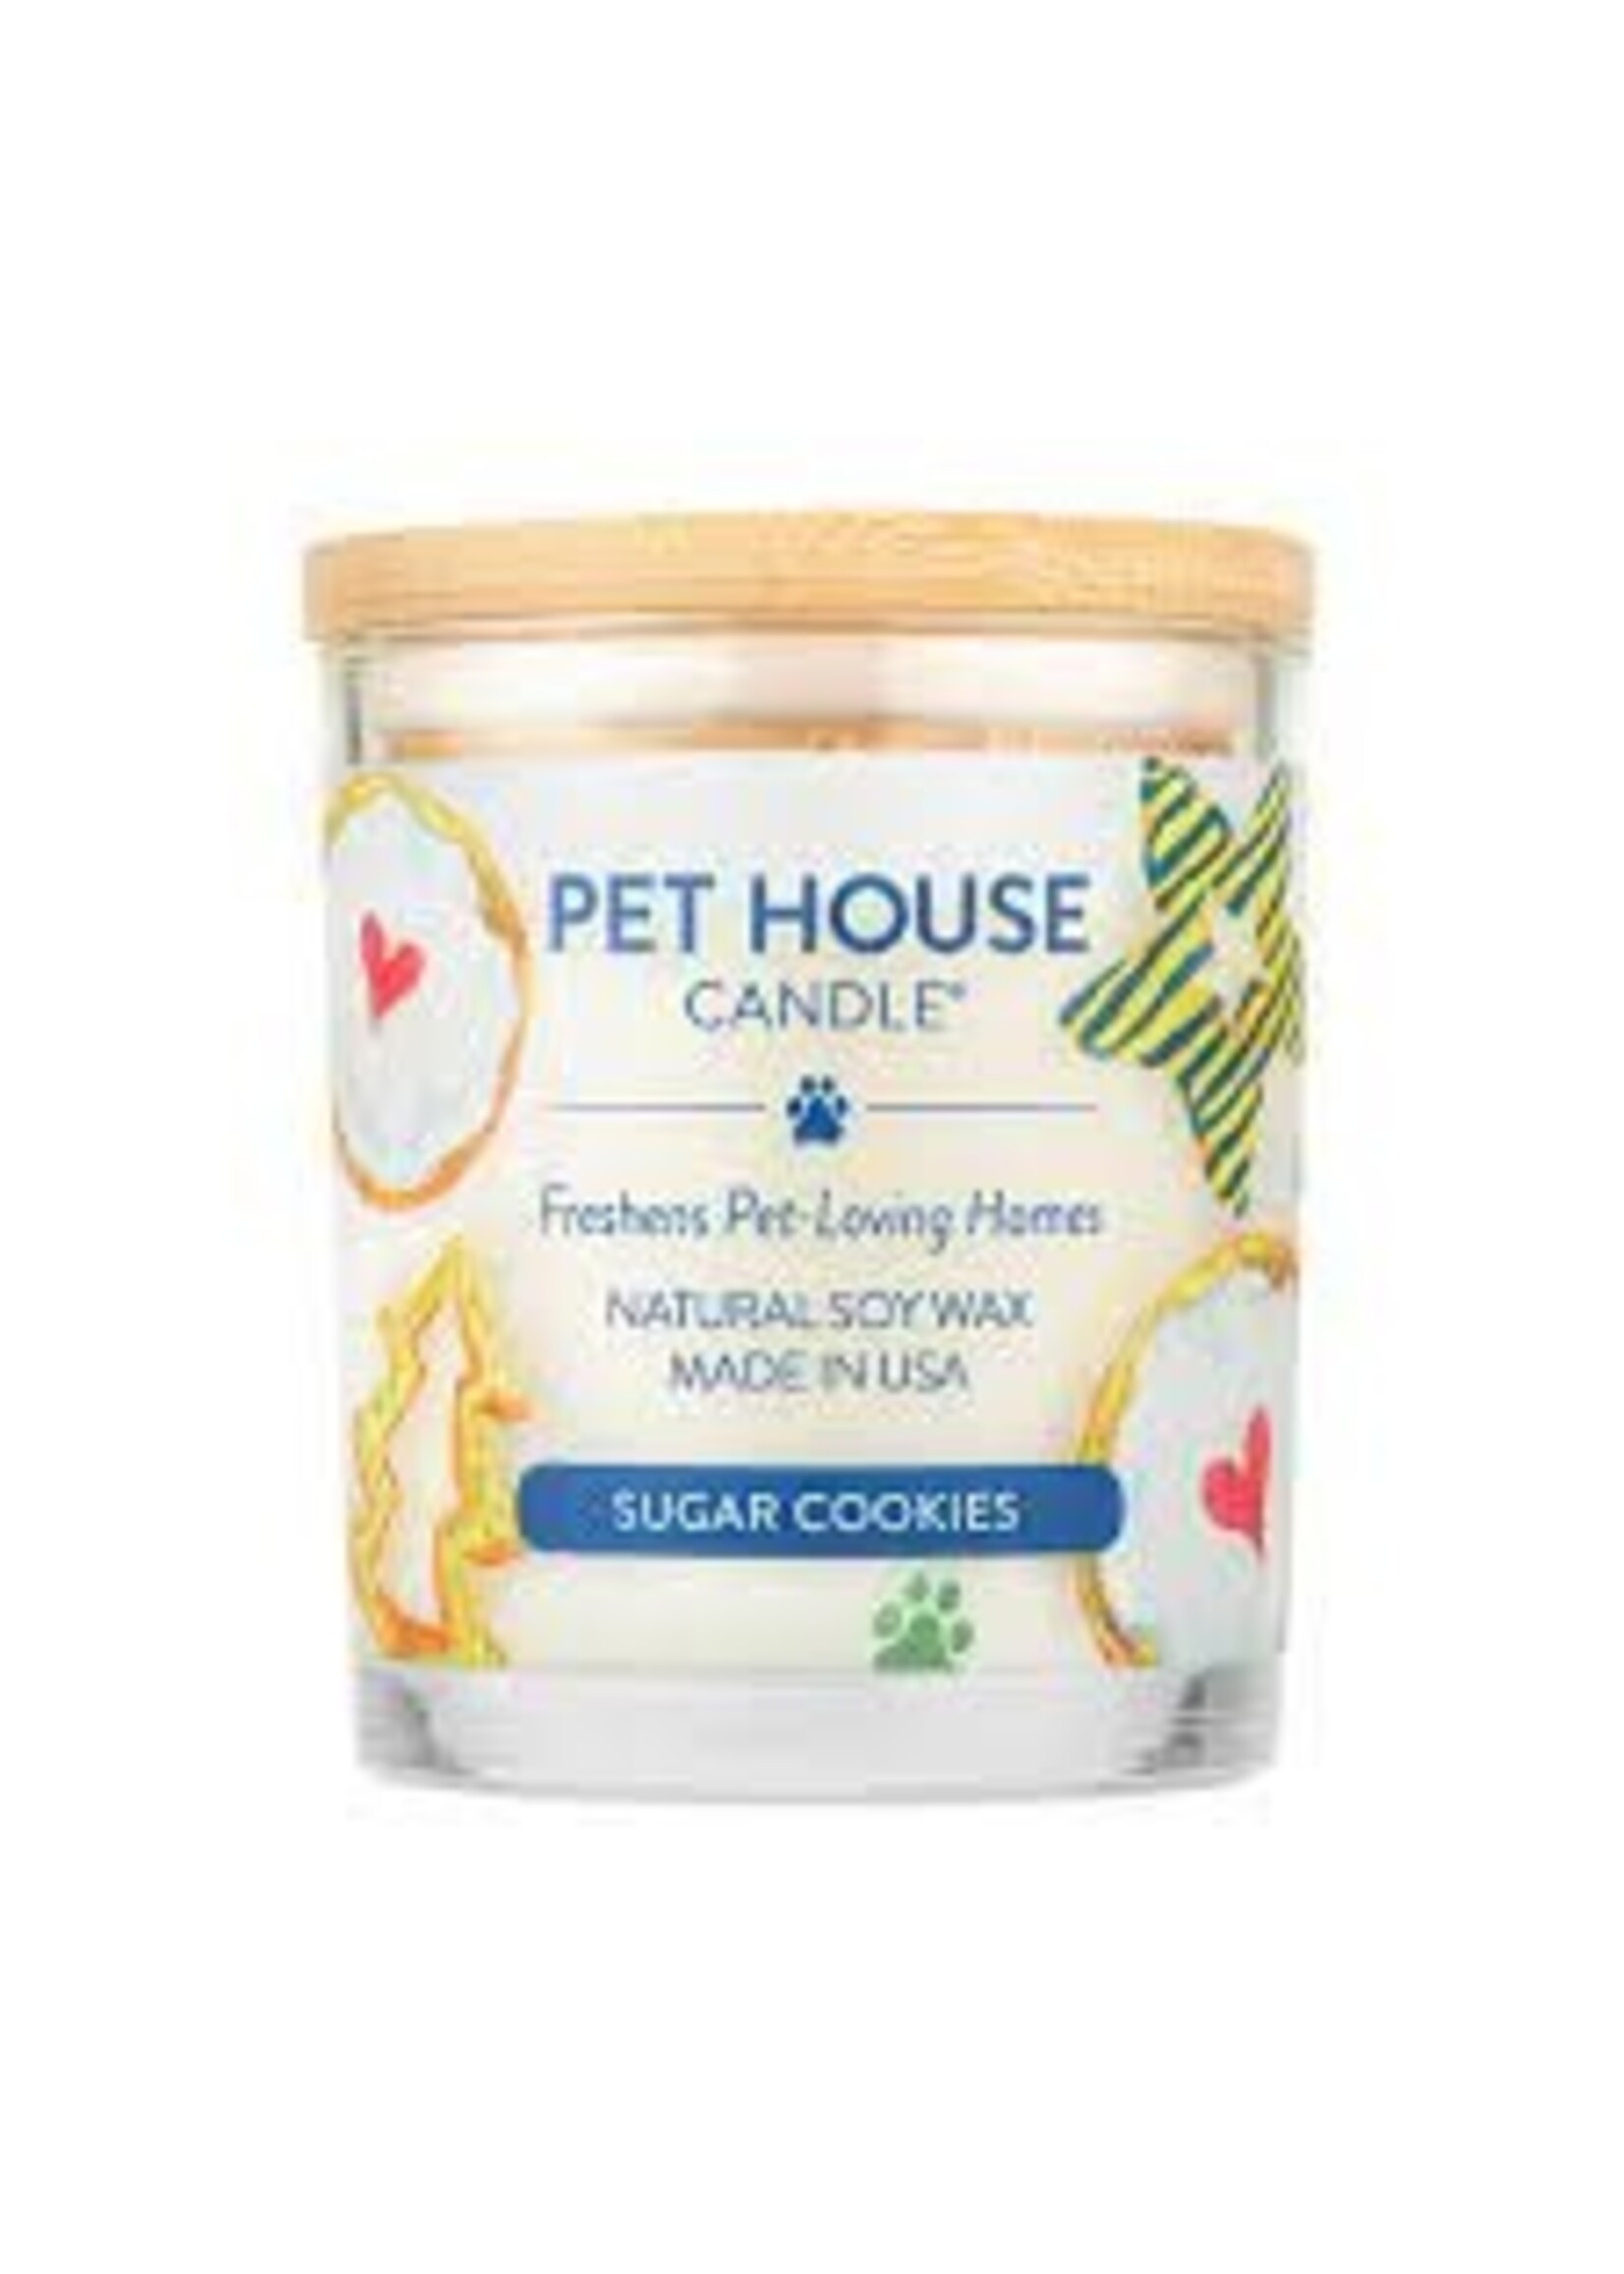 Pet House Pet House Candle Fall